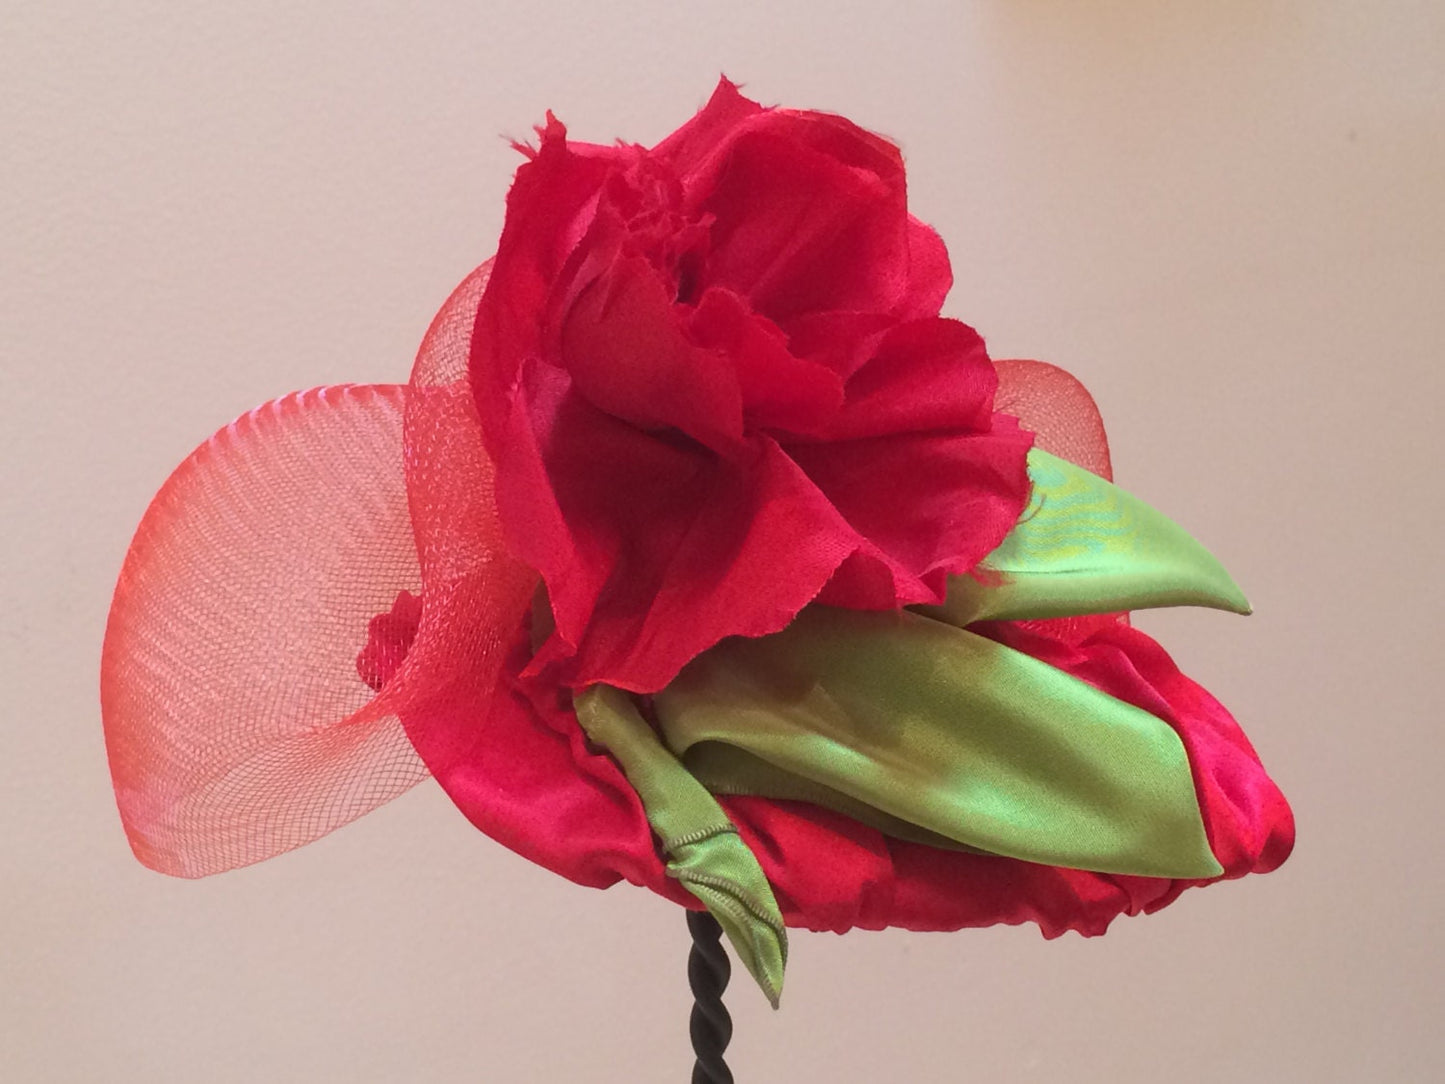 Red Satin Fascinator, Christmas Fascinator, Valentine's fascinator, Brides maids headpiece. Holiday and Christmas party Headpiece. Red Rose